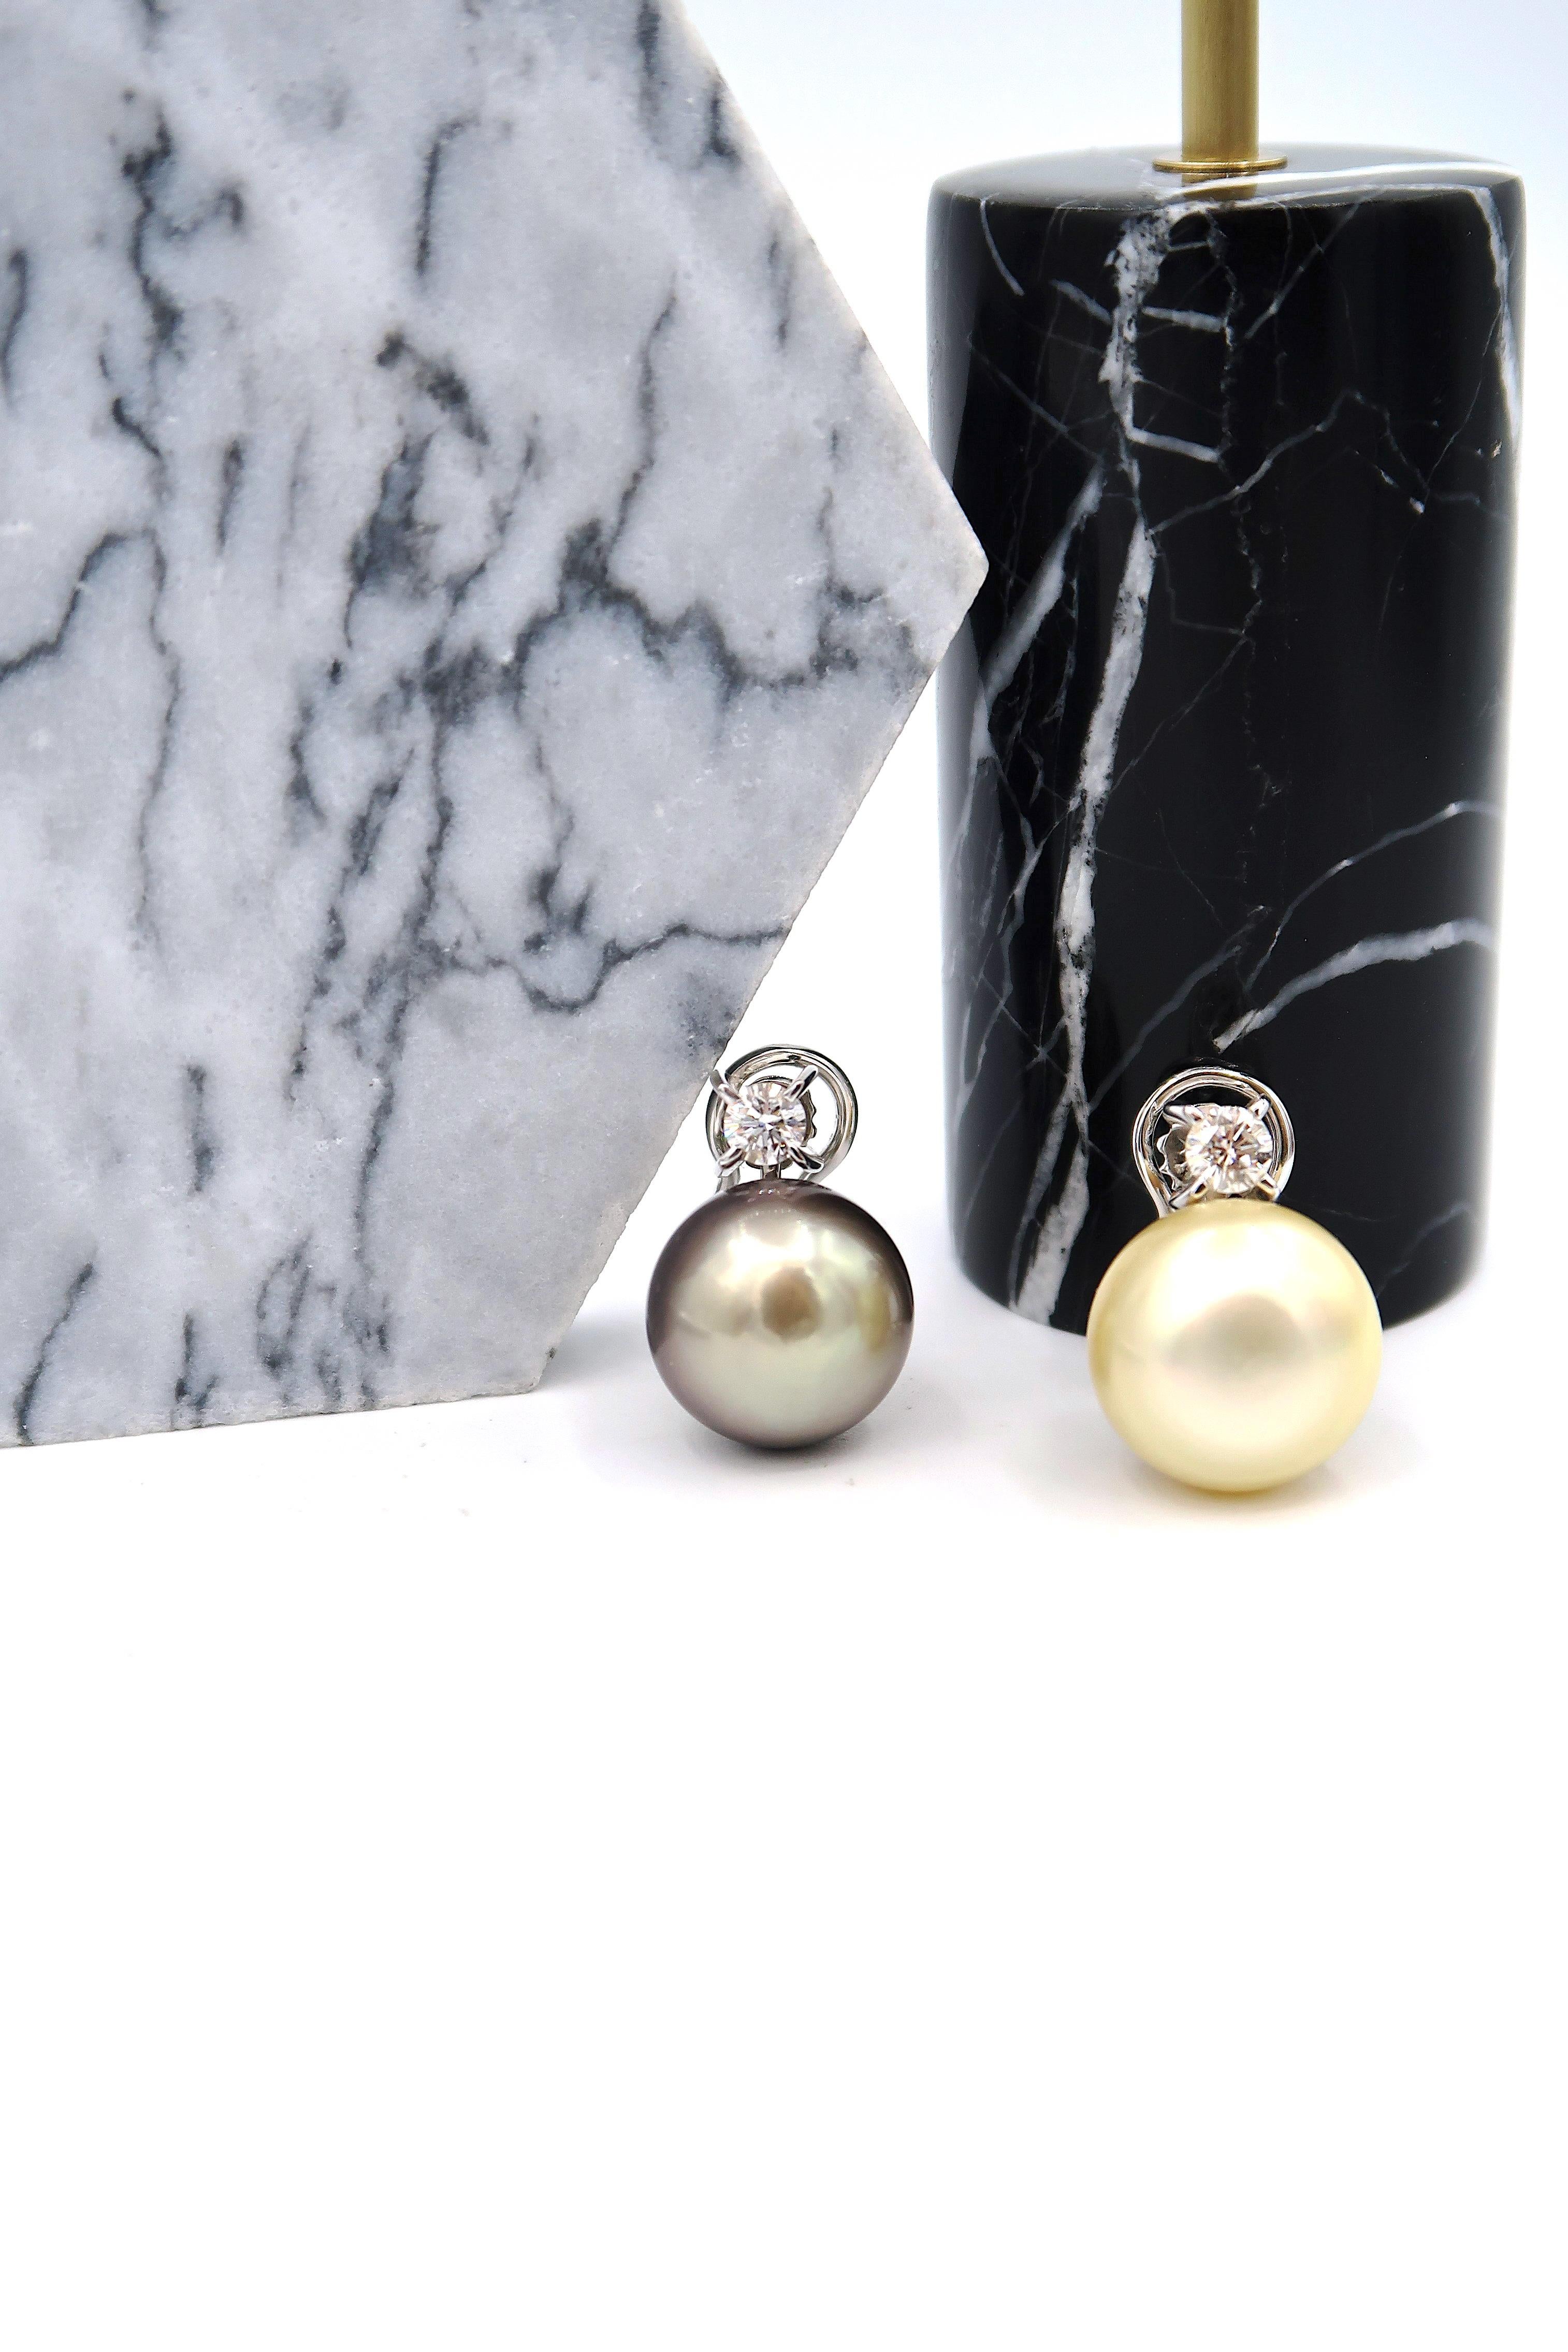 Non-pierced Mismatched Simple Diamond Light Gold South Sea Tahitian Pearl Clip Earrings

Metal: 18K White Gold, 5.43 g
Diamond: 0.50 ct
South Sea Pearl: 14.61 mm
Tahitian Pearl: 13.91 mm